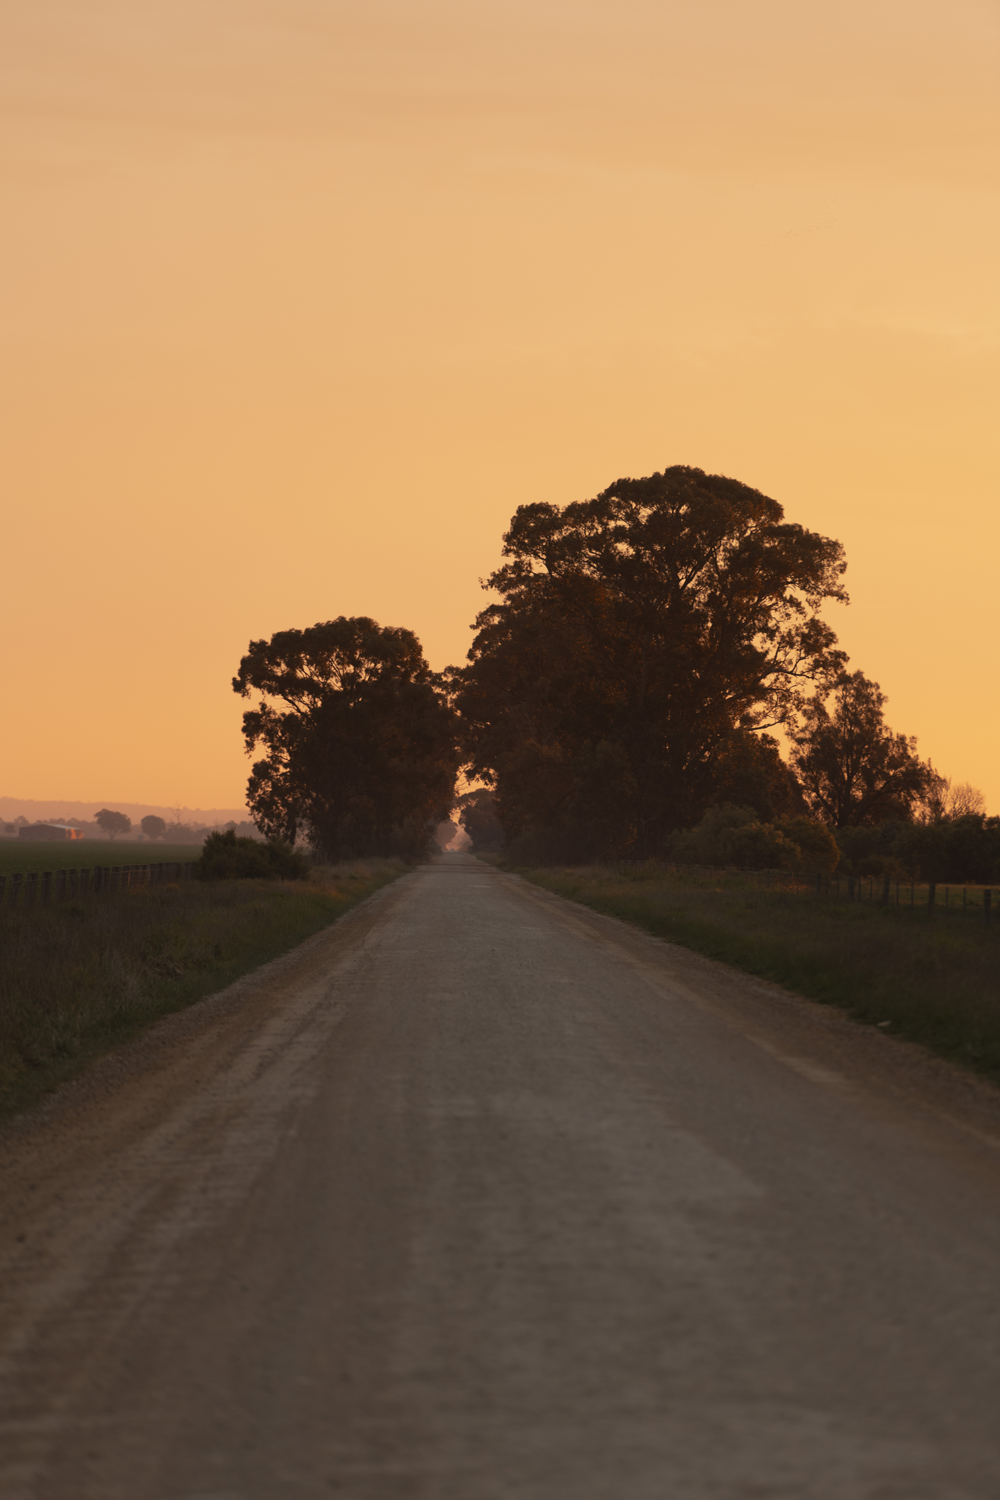 Colour photograph of dirt road in countryside at sunset.